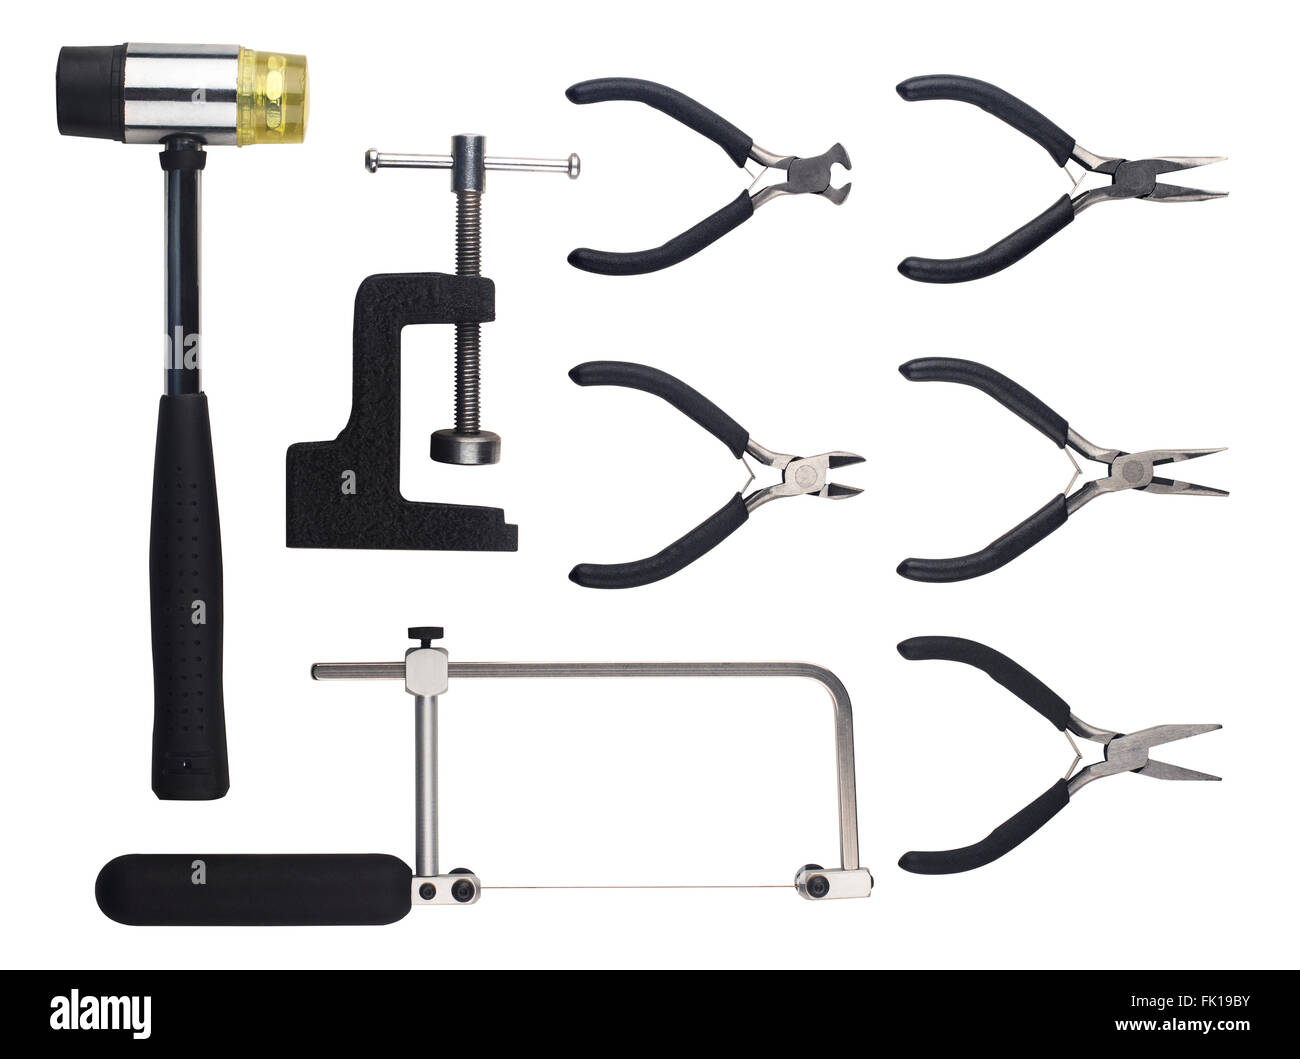 Set of working tools with black handles, isolated on white background Stock Photo